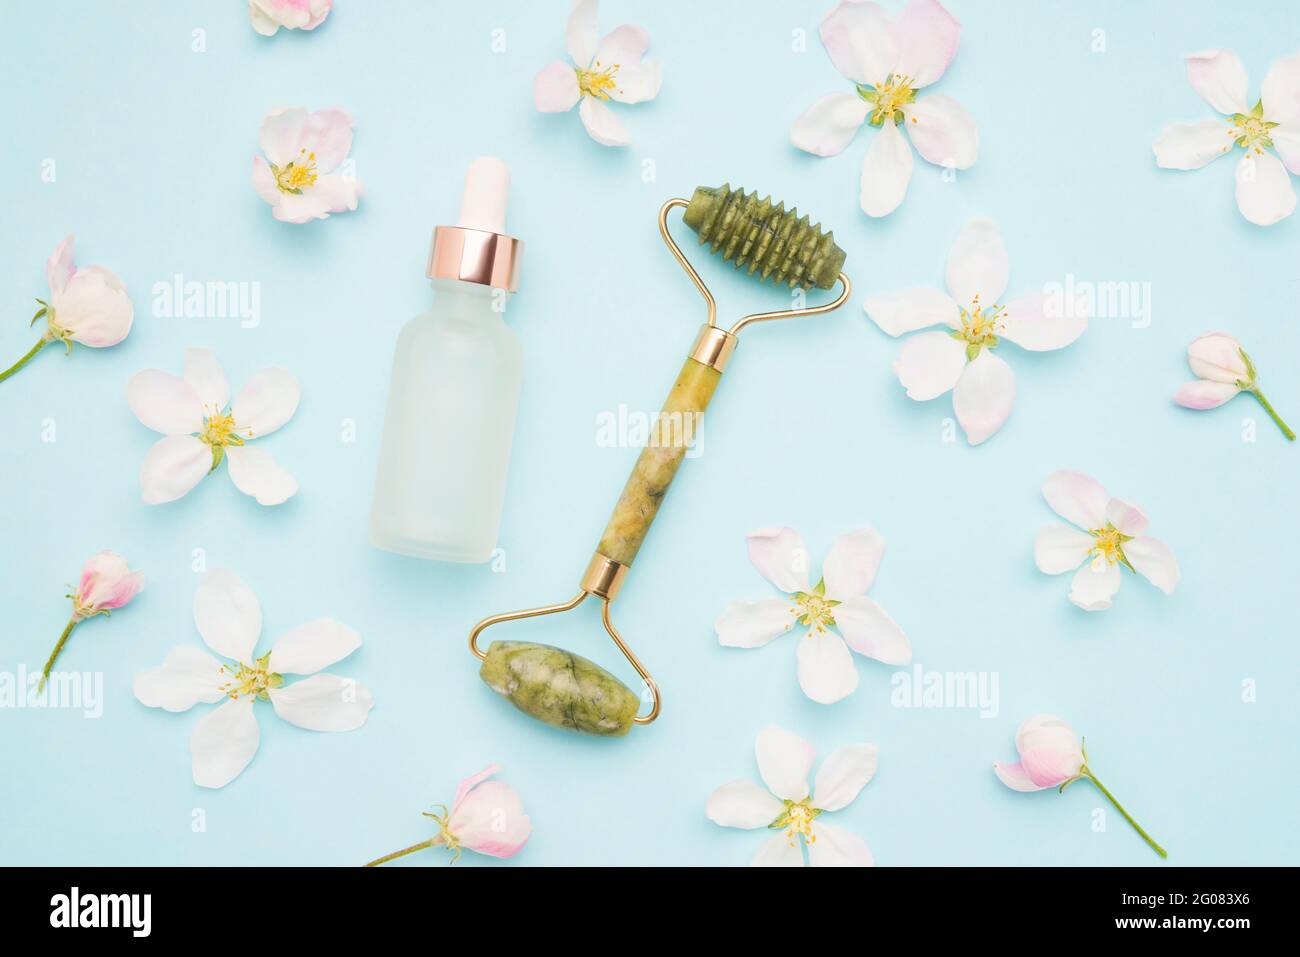 Jade roller for face massage, glass dropper bottle for medical and cosmetic use, and apple tree blossom flowers on light blue background. SPA concept Stock Photo